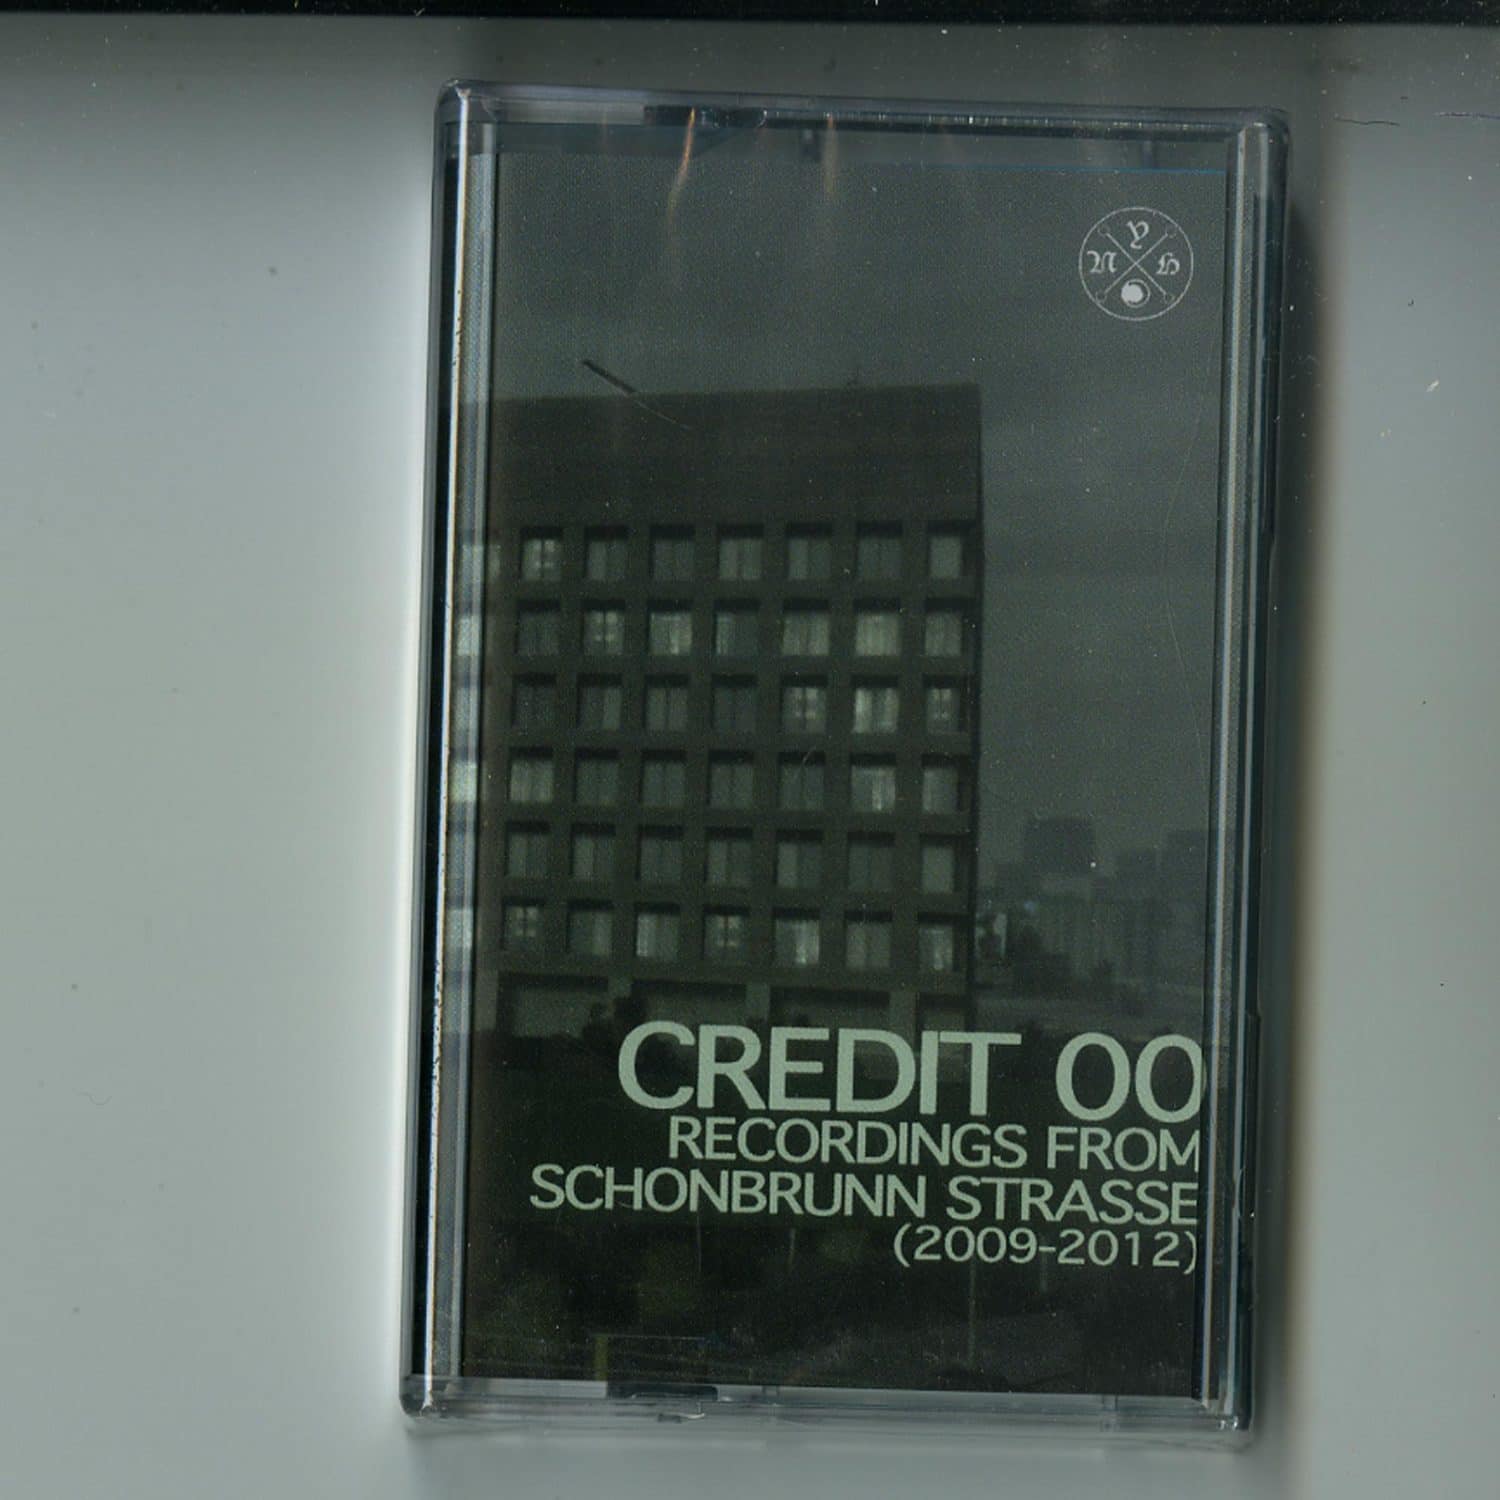 Credit 00 - RECORDINGS FROM SCHONBRUNN STRASSE 2009 - 2012 